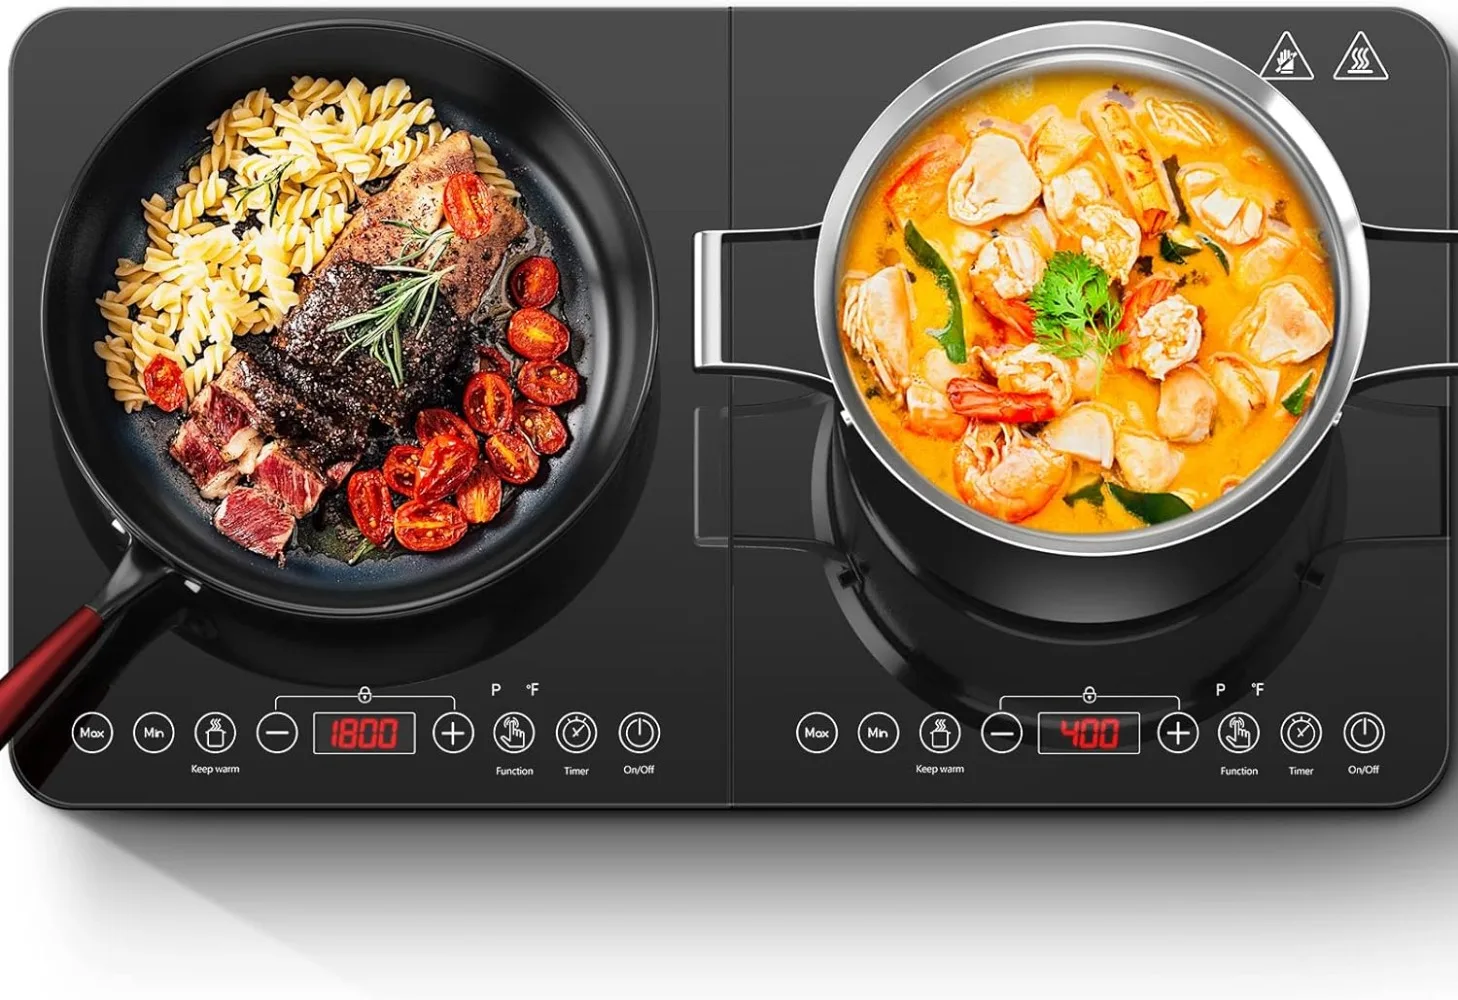 Aobosi Double Induction Cooktop,Portable Induction Cooker with 2 Burner Independent Control,Ultrathin Body,10 Temperature